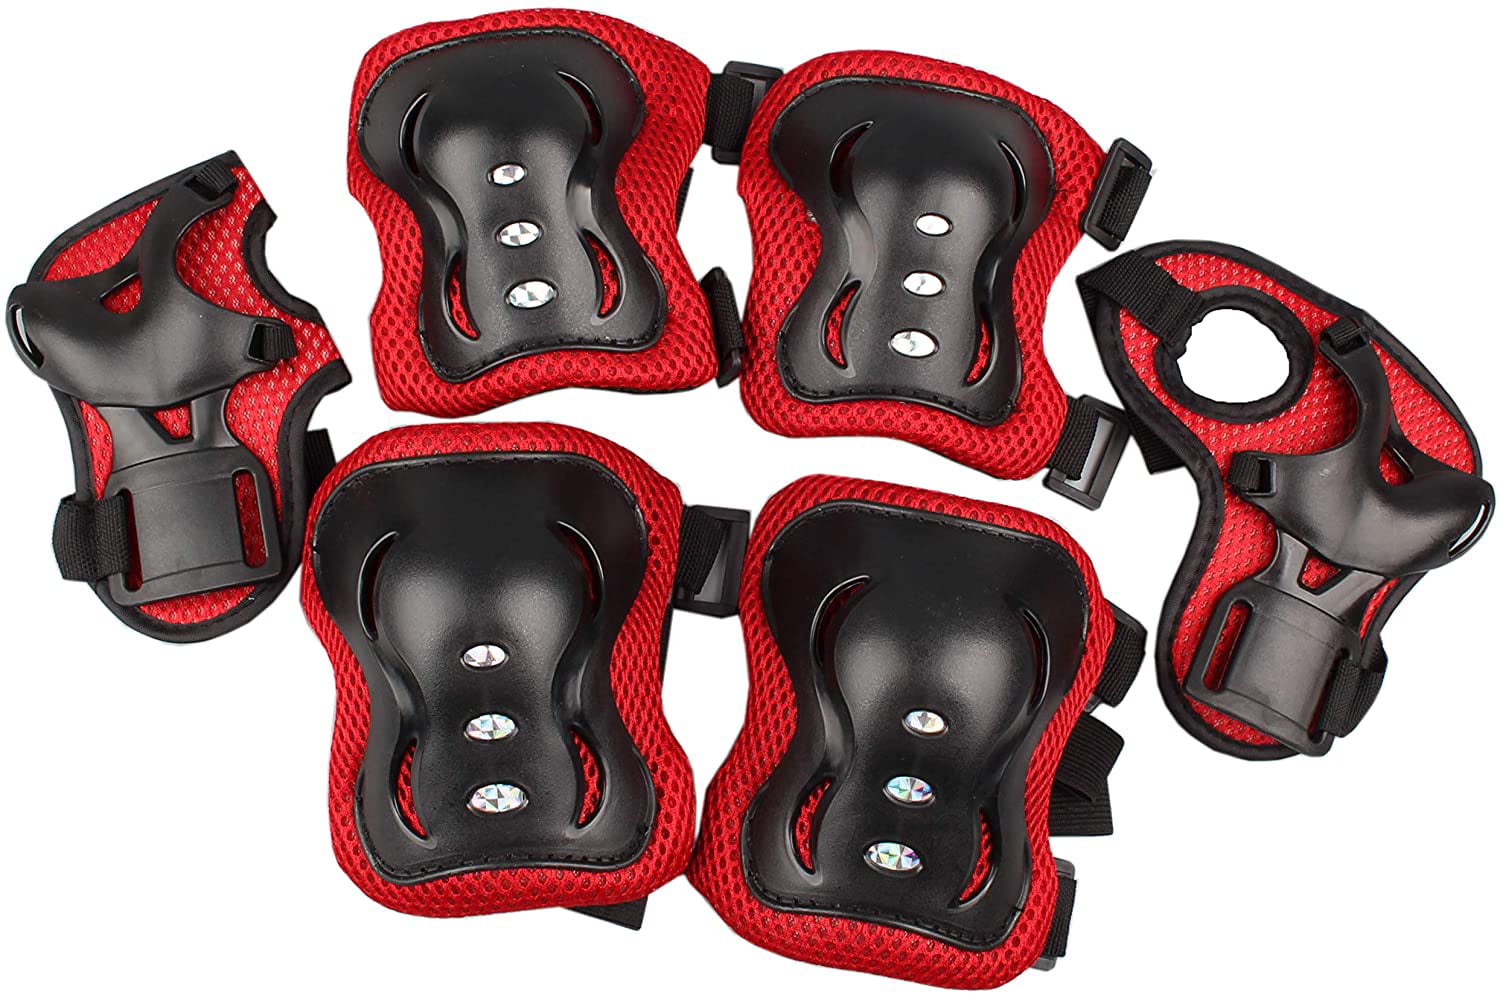 Protective Gear Set for Kid Knee Pads Elbow Pads Wrist Guards Adjustable 6 Pcs